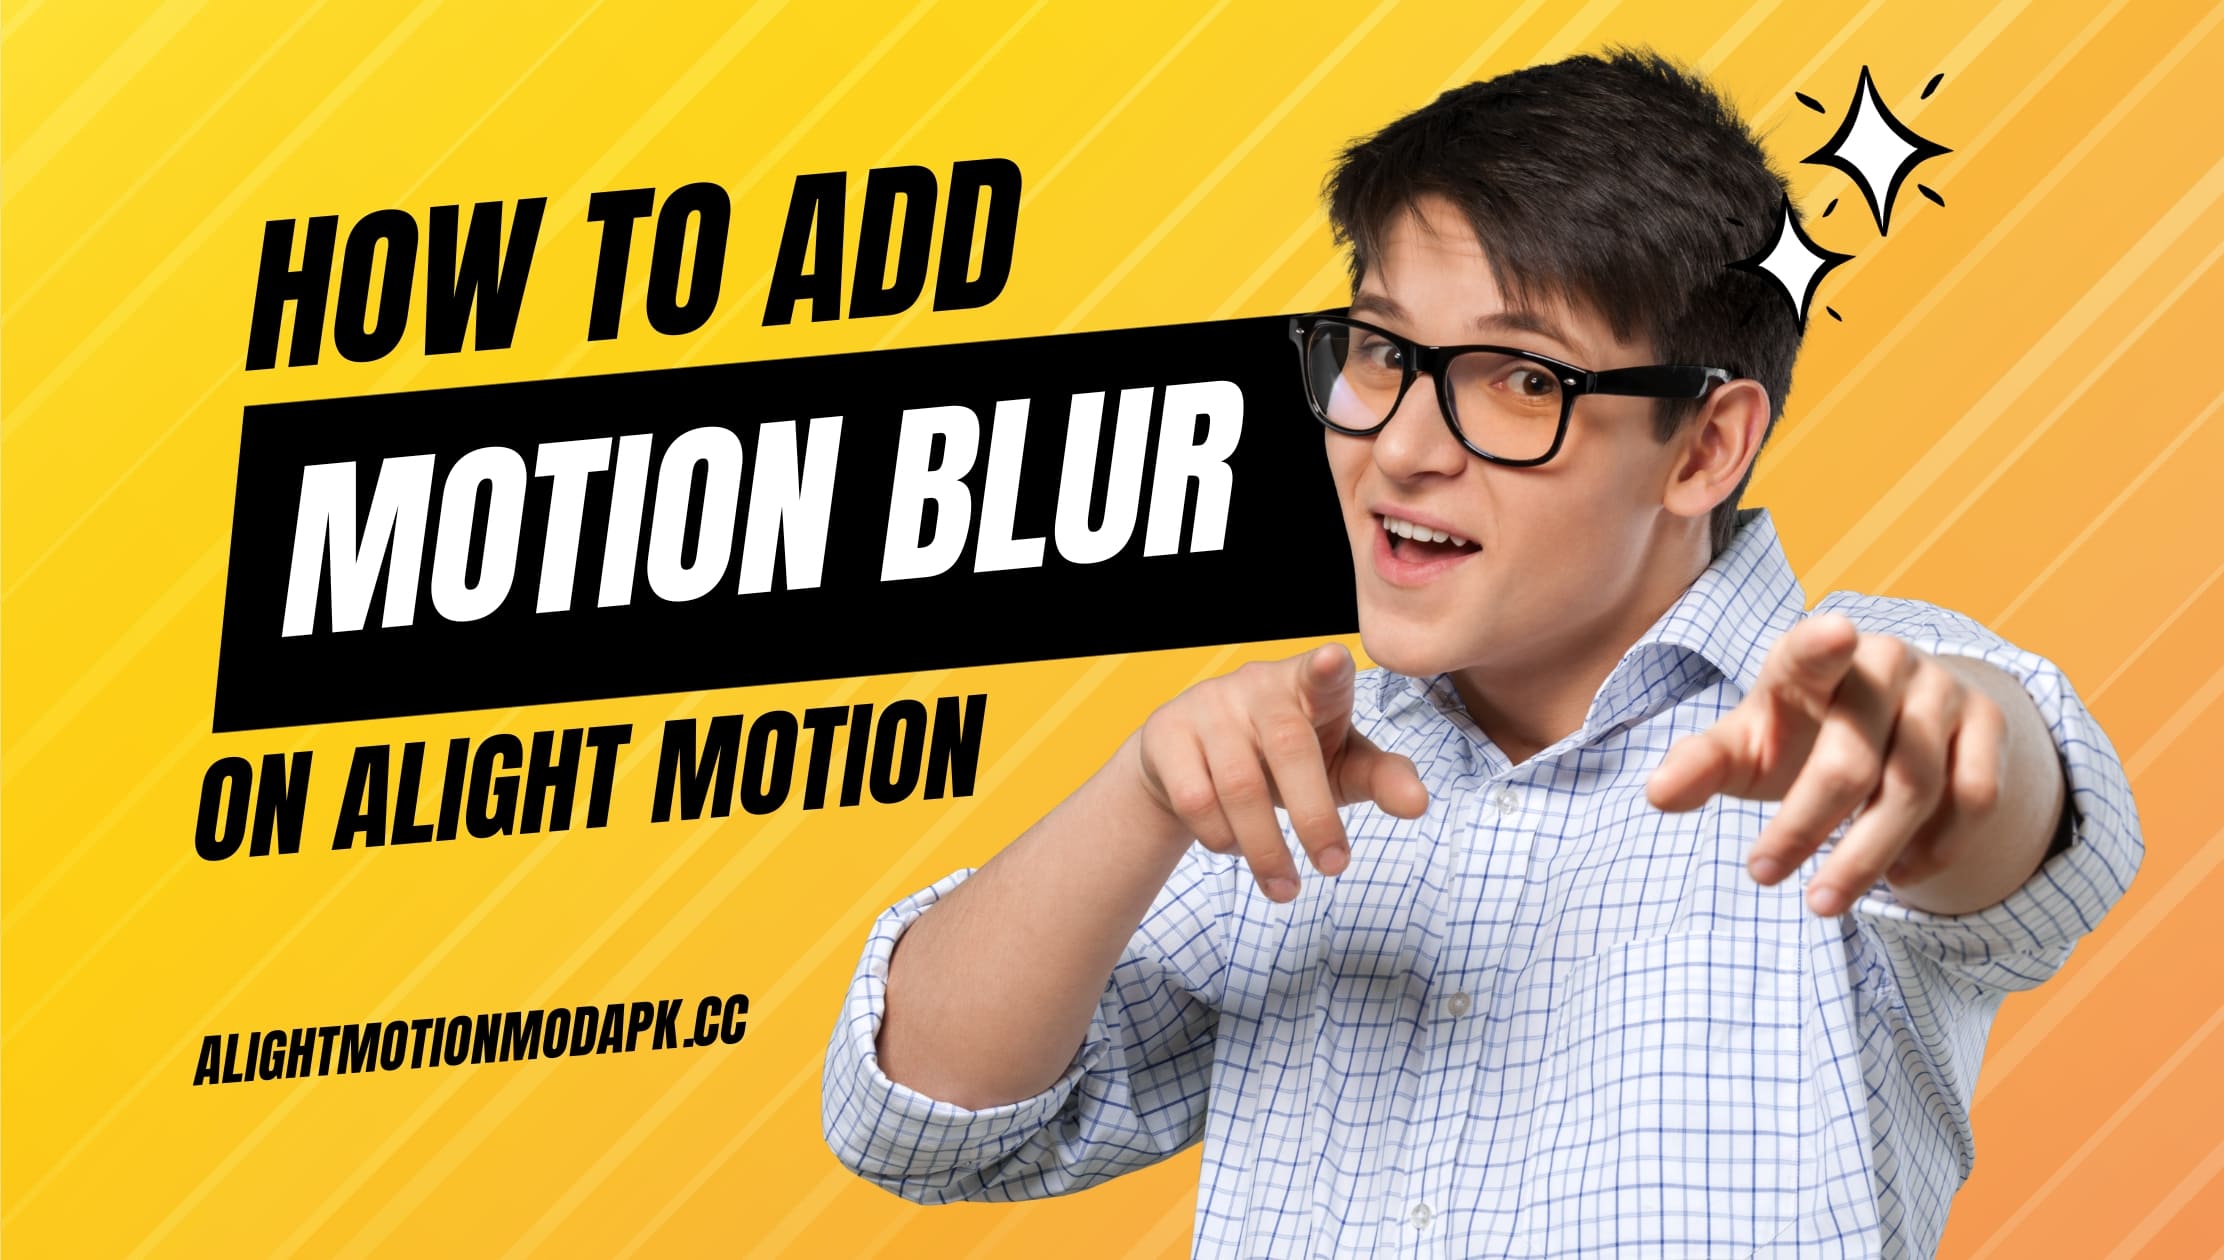 How To Add Motion Blur Effect On Alight Motion?